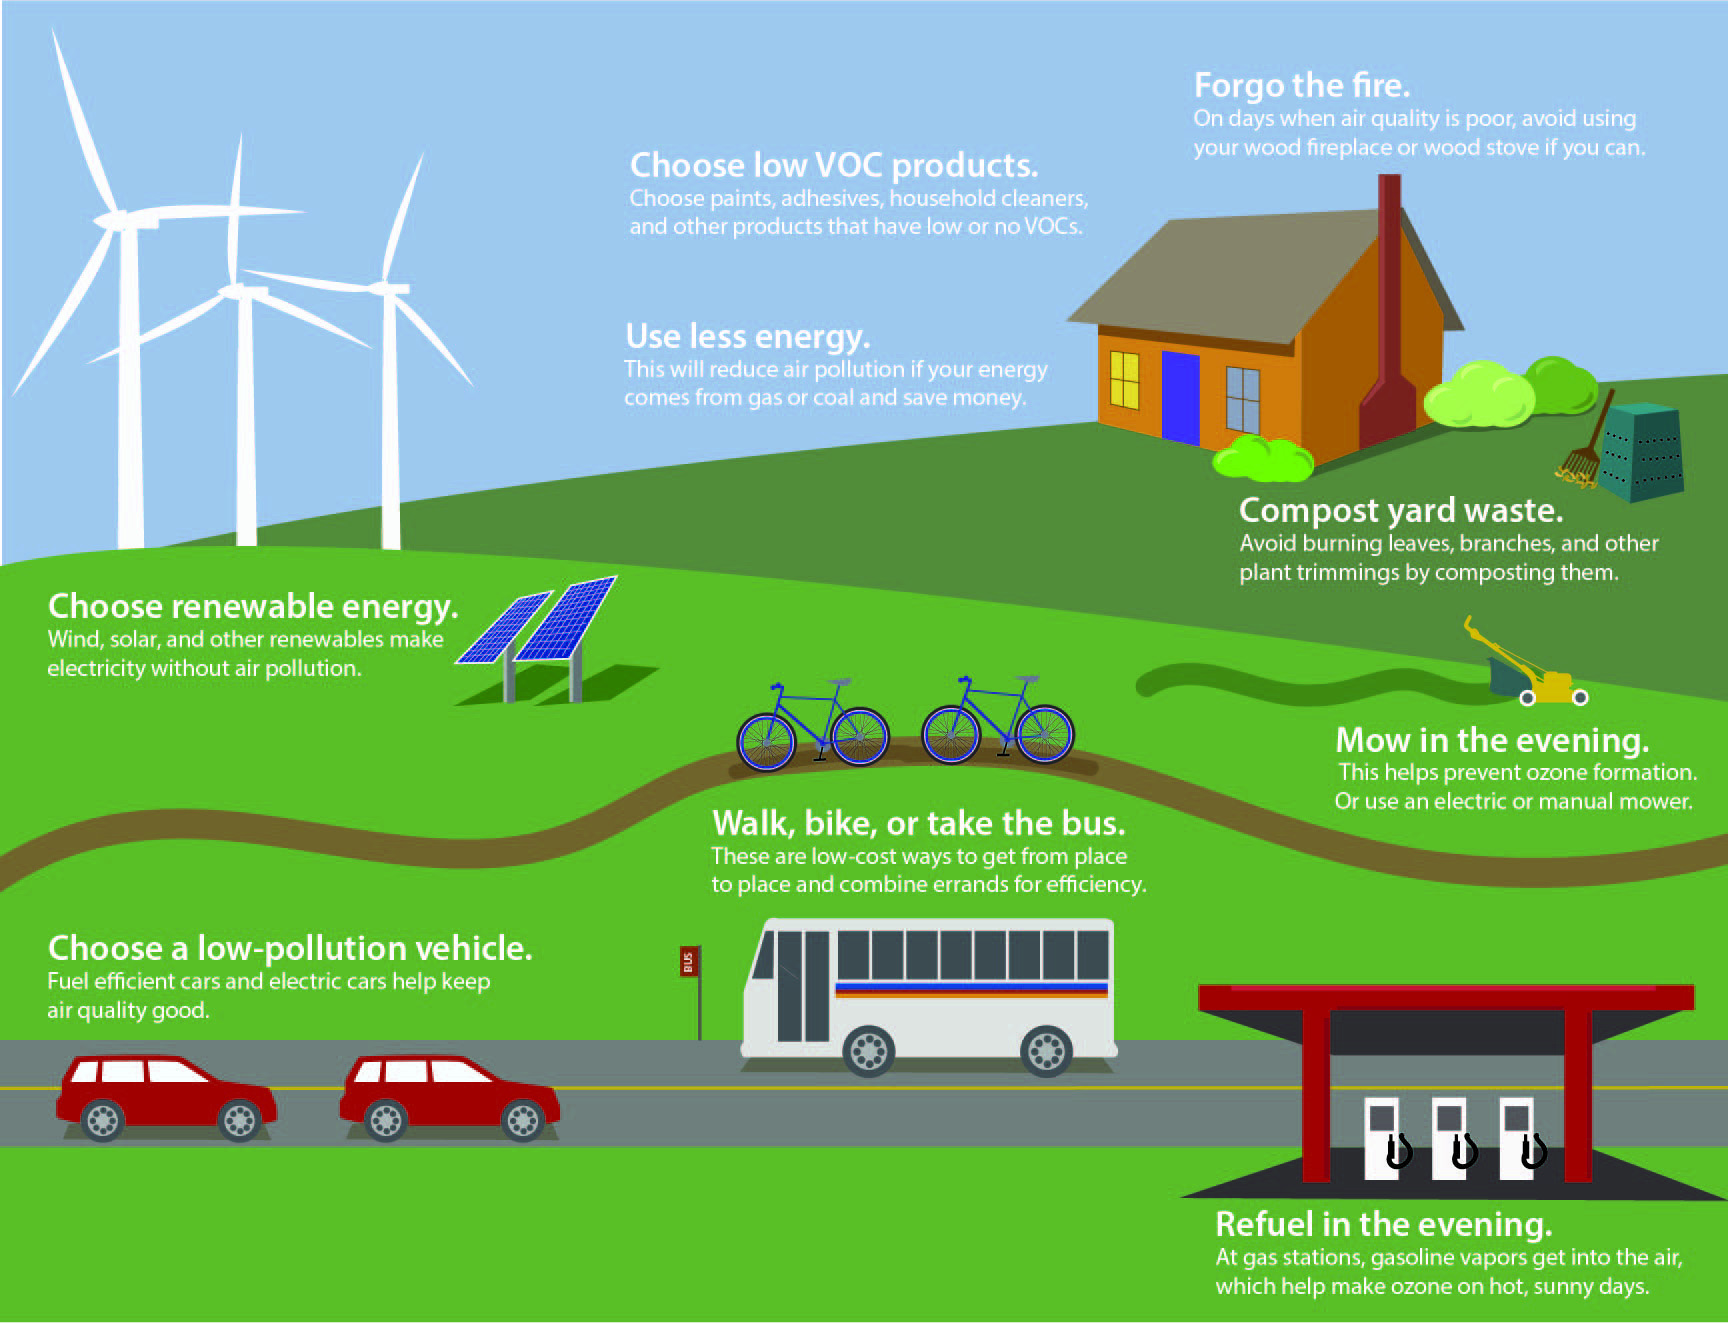 This is an illustration showing ways that you can help reduce air pollution: wind turbines are a source of renewable energy; drive low pollution vehicles; choose alternative transportation modes, such as walking, riding the bus, or riding a bicycle; refueling in the evening; and around the house choose low VOC products, use less energy, forgo the fire, and mow the grass in the evening.